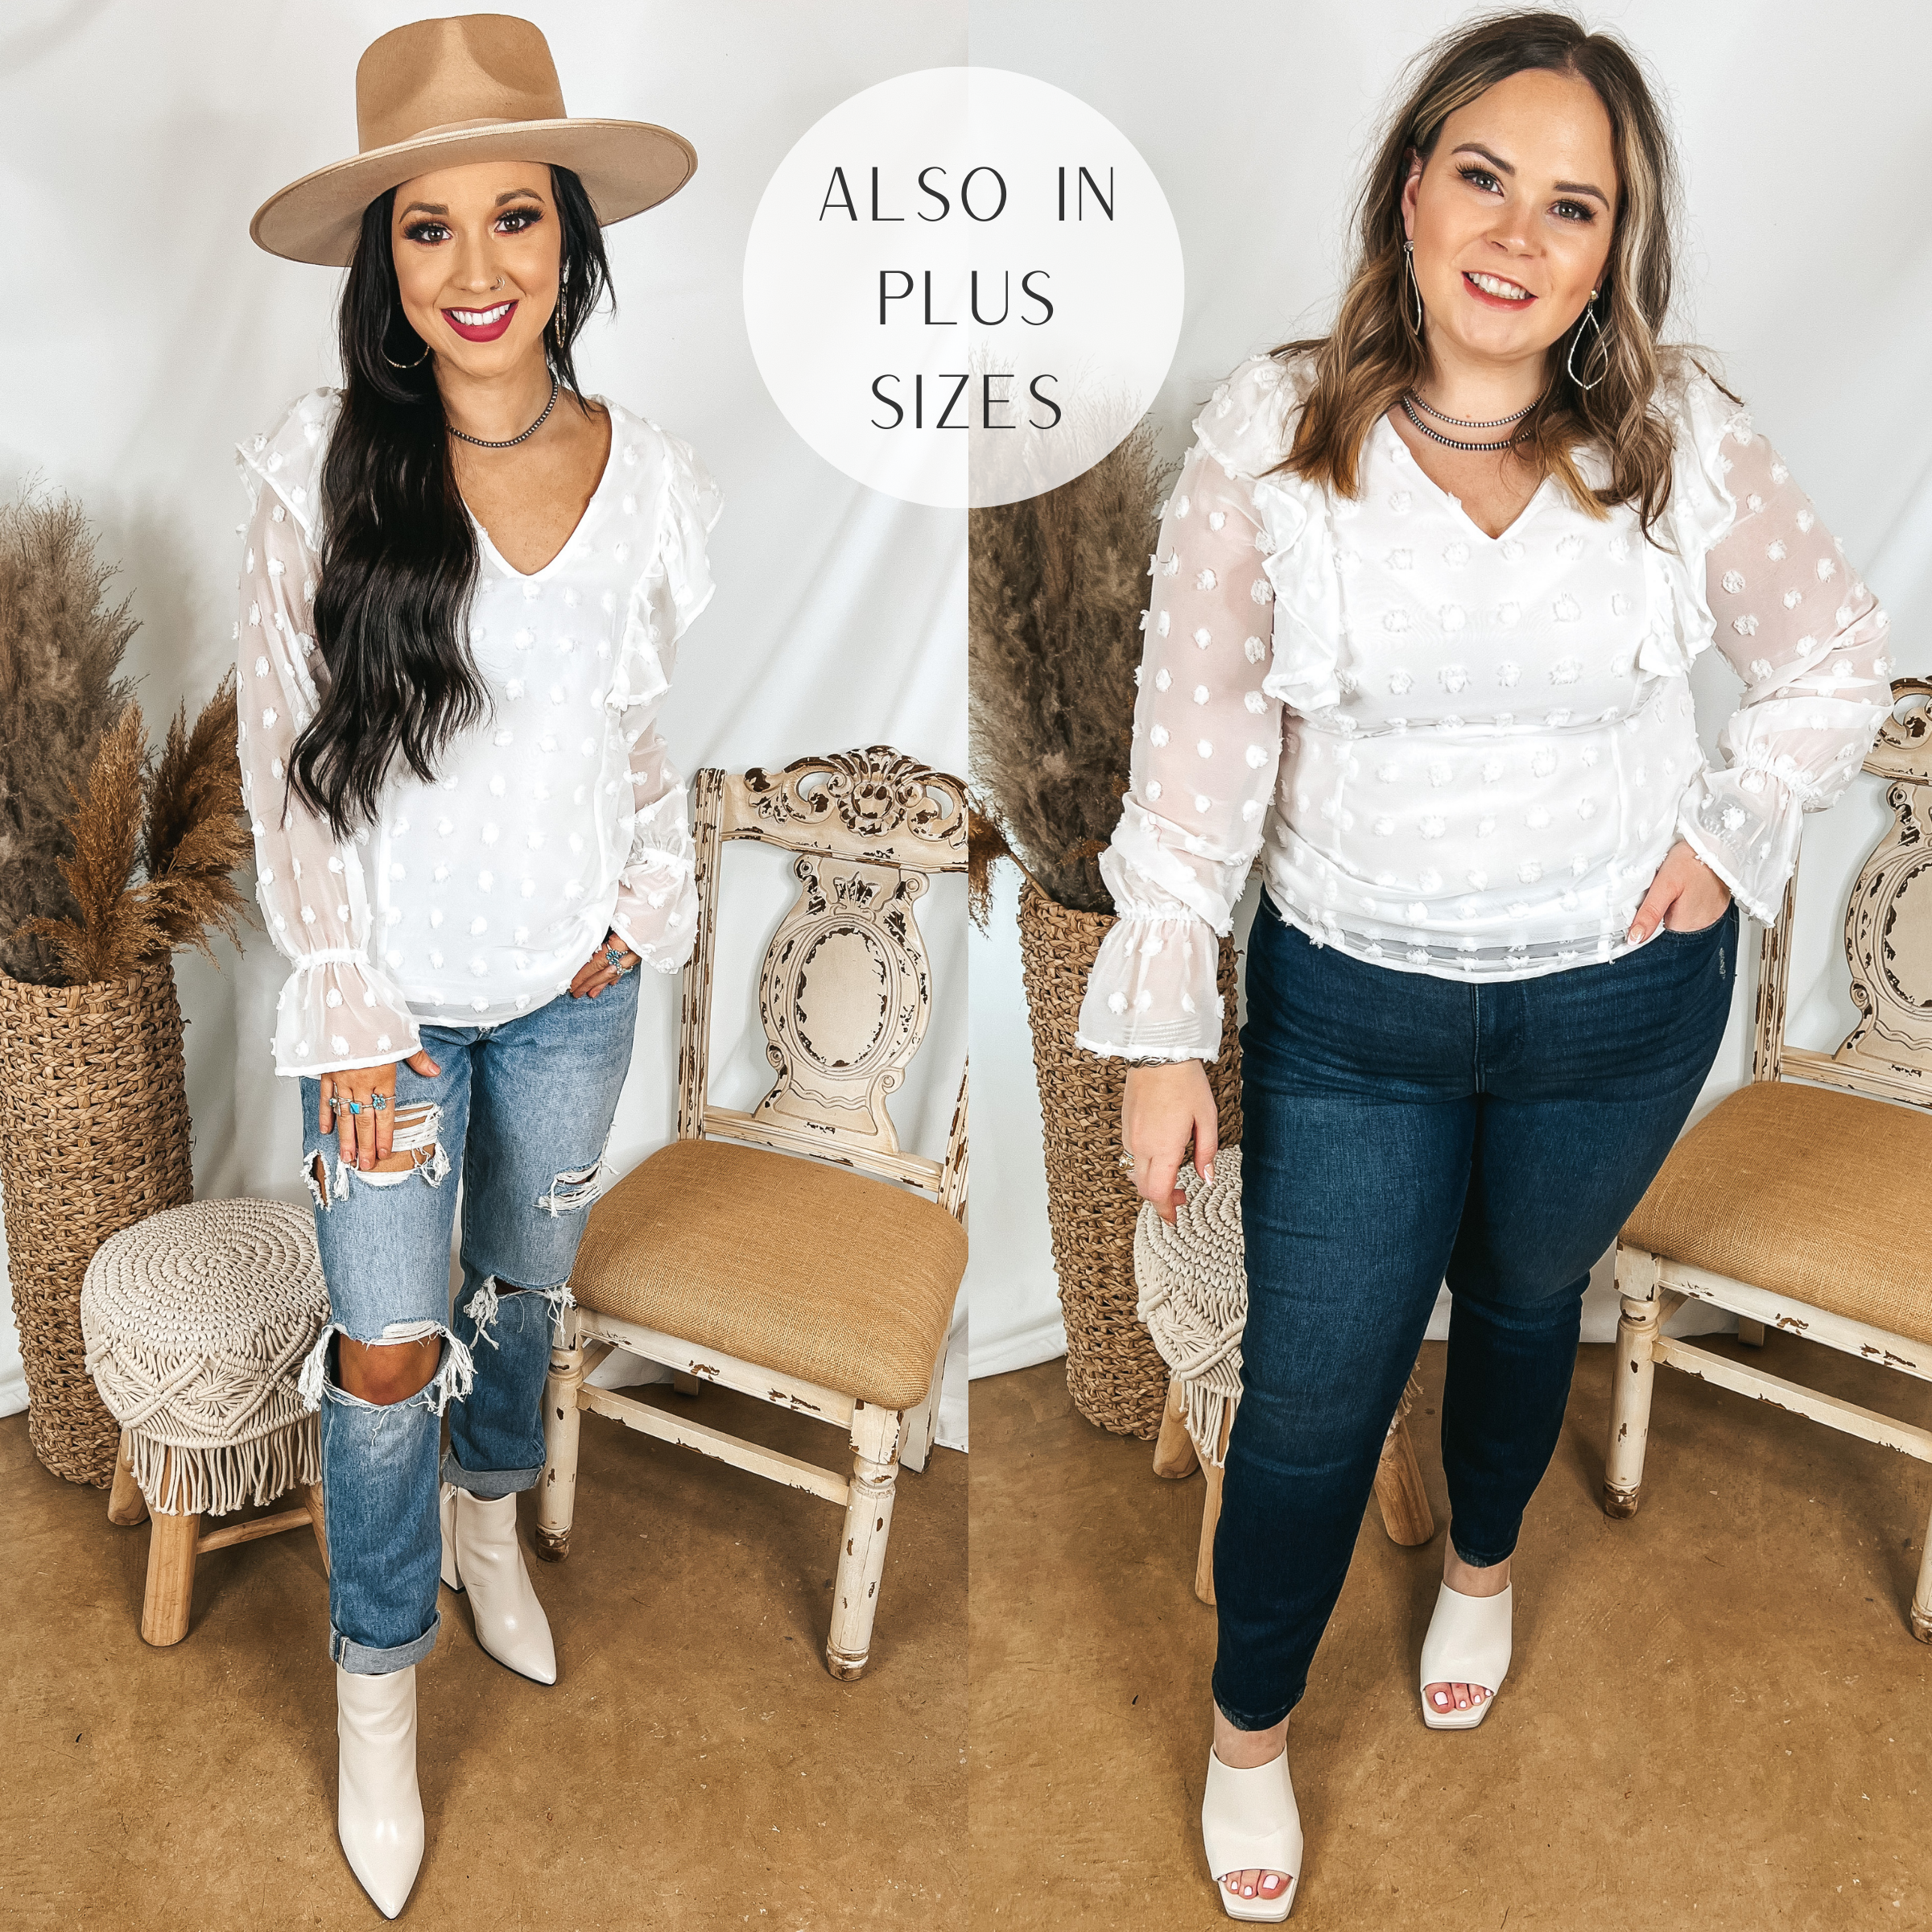 Models are wearing a swiss dot blouse that has long sleeves and ruffle detailing. Size small model has it paired with distressed boyfriend jeans, white booties, and a tan hat. Size large model has it paired with dark wash skinny jeans, white heels, and silver jewelry.